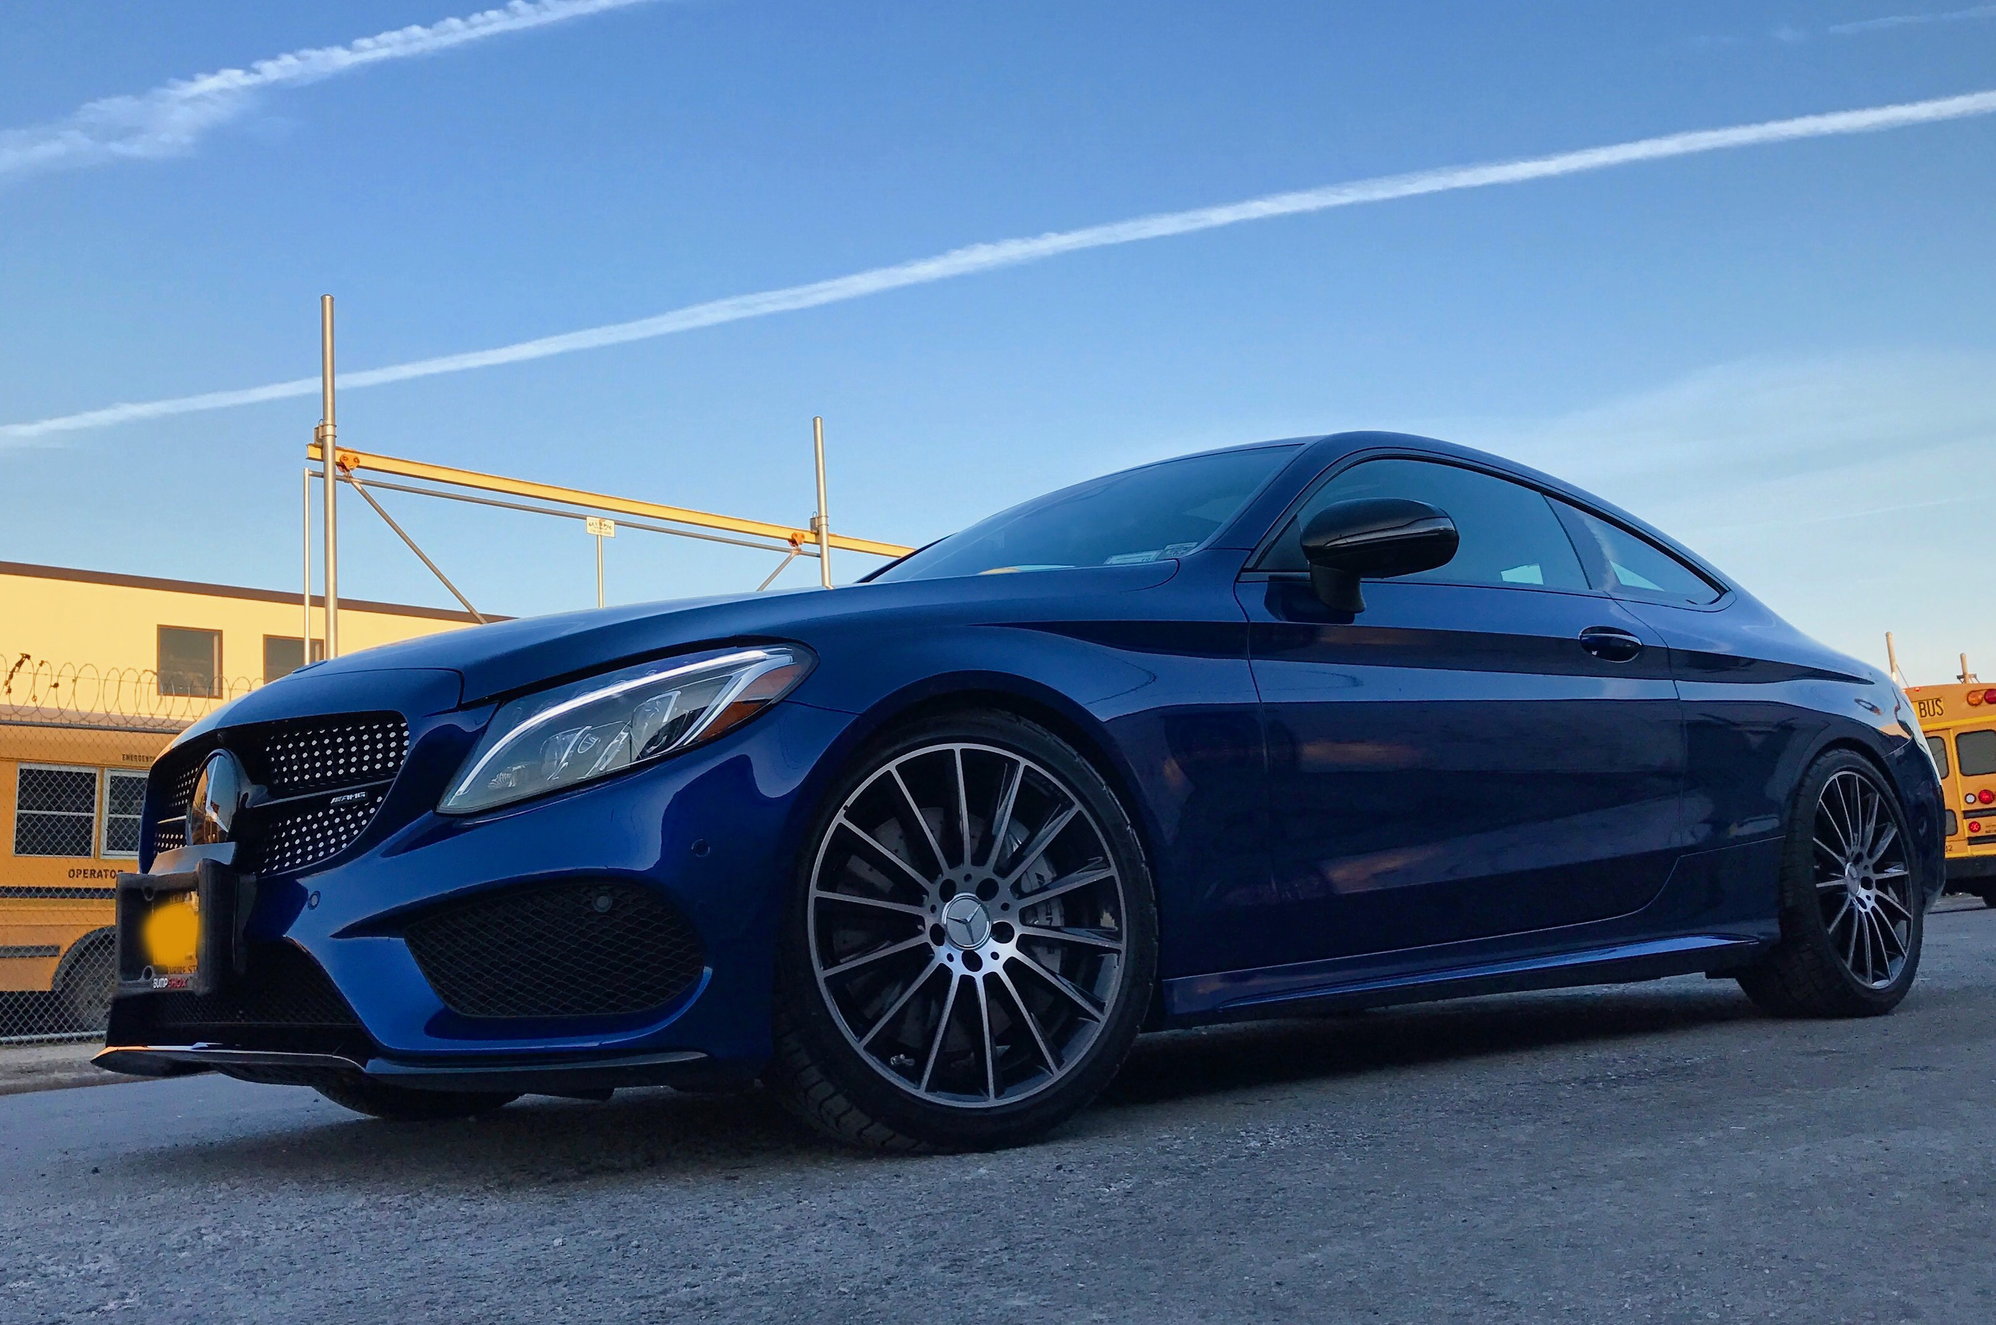 2017 Mercedes-Benz C43 AMG - Lease transfer 2017 Mercedes-AMG C43 Coupe - Used - VIN VINWDDWJ6EB3HF520 - 22,000 Miles - 6 cyl - AWD - Automatic - Coupe - Blue - Brooklyn, NY 11201, United States